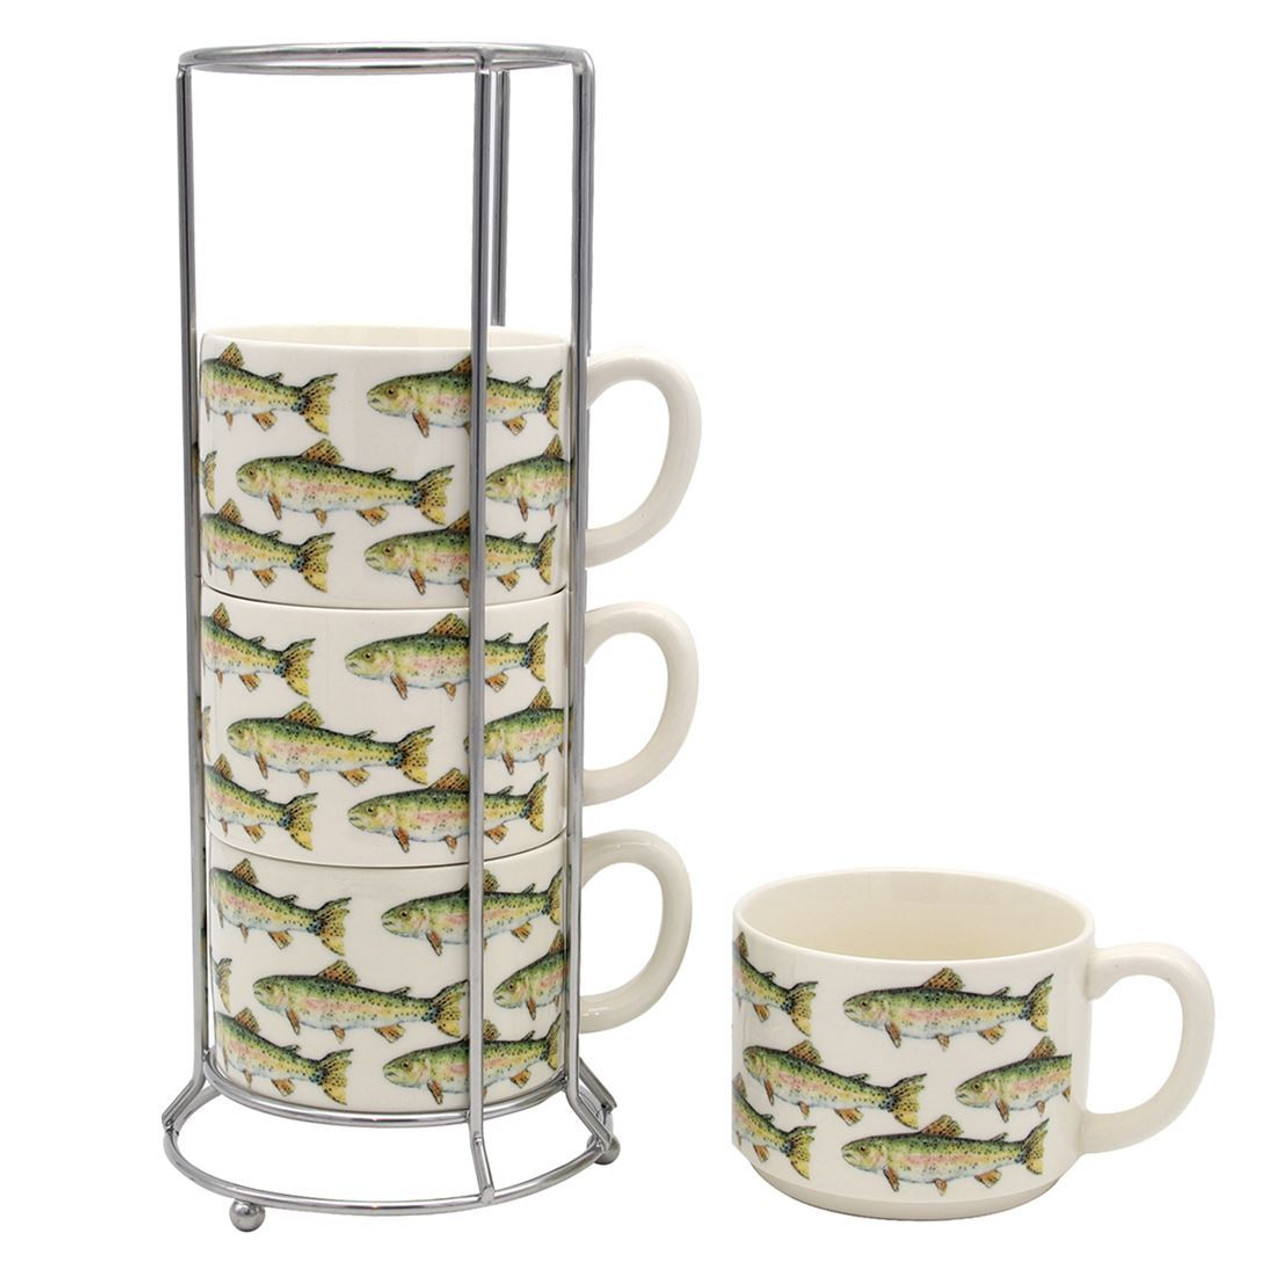 Trout Stacking Mug Set - The Old Farmer's Store